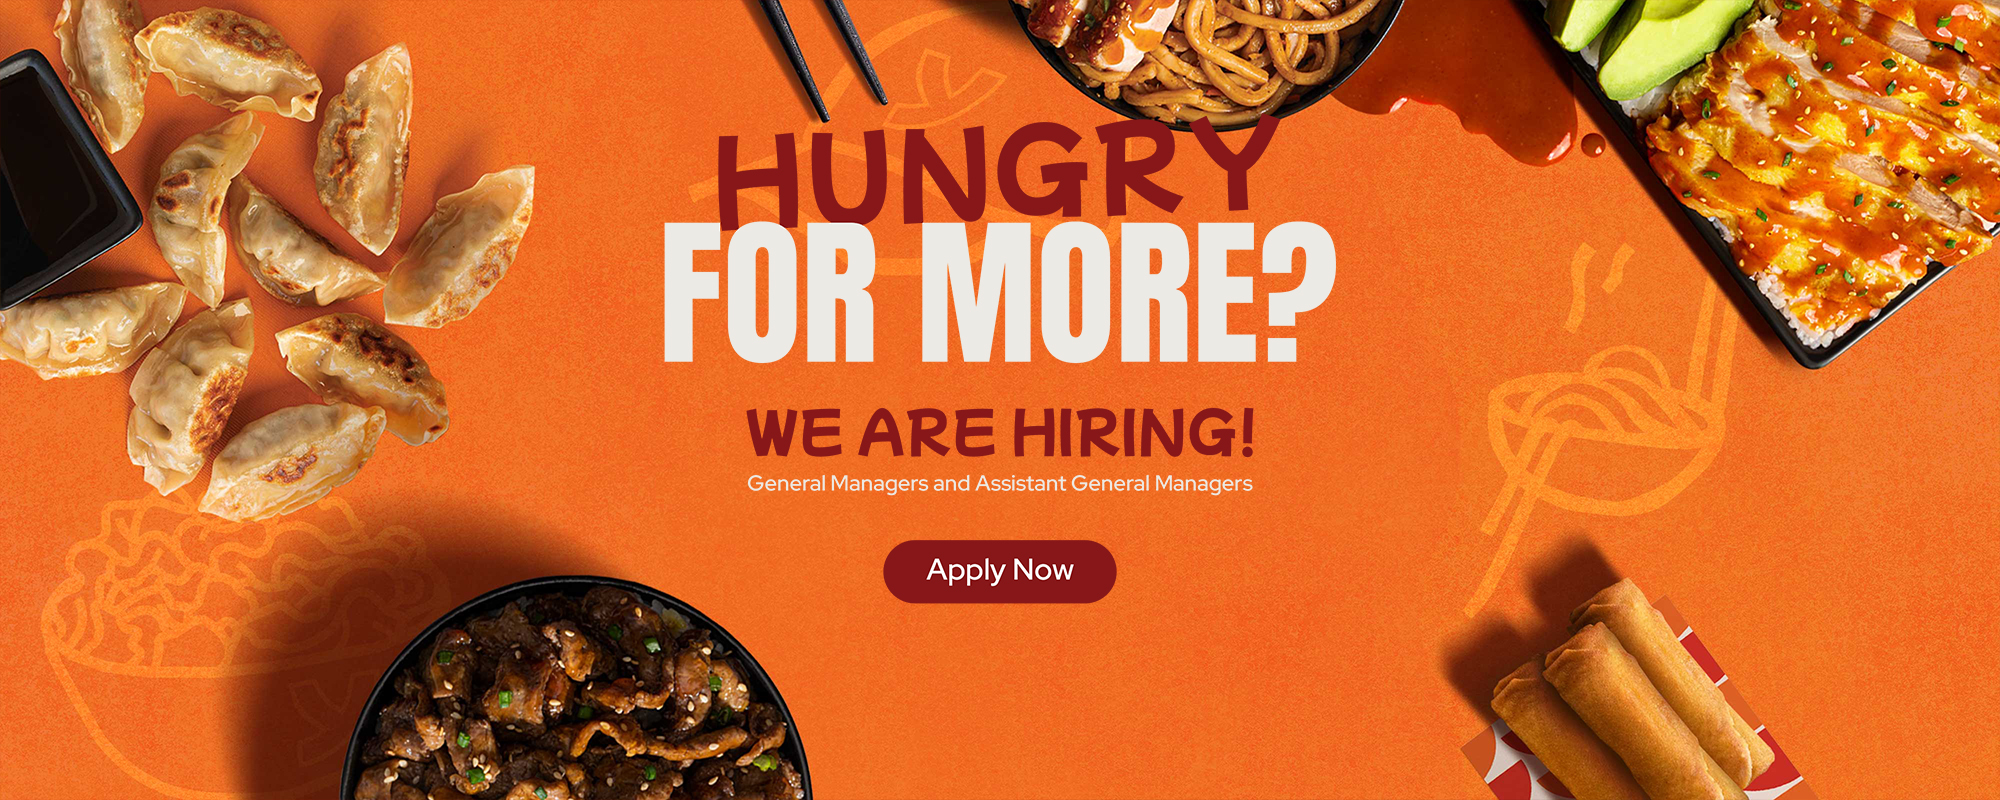 Hungry For More? We Are Hiring! General Managers and Assistant General Managers. Apply Now.